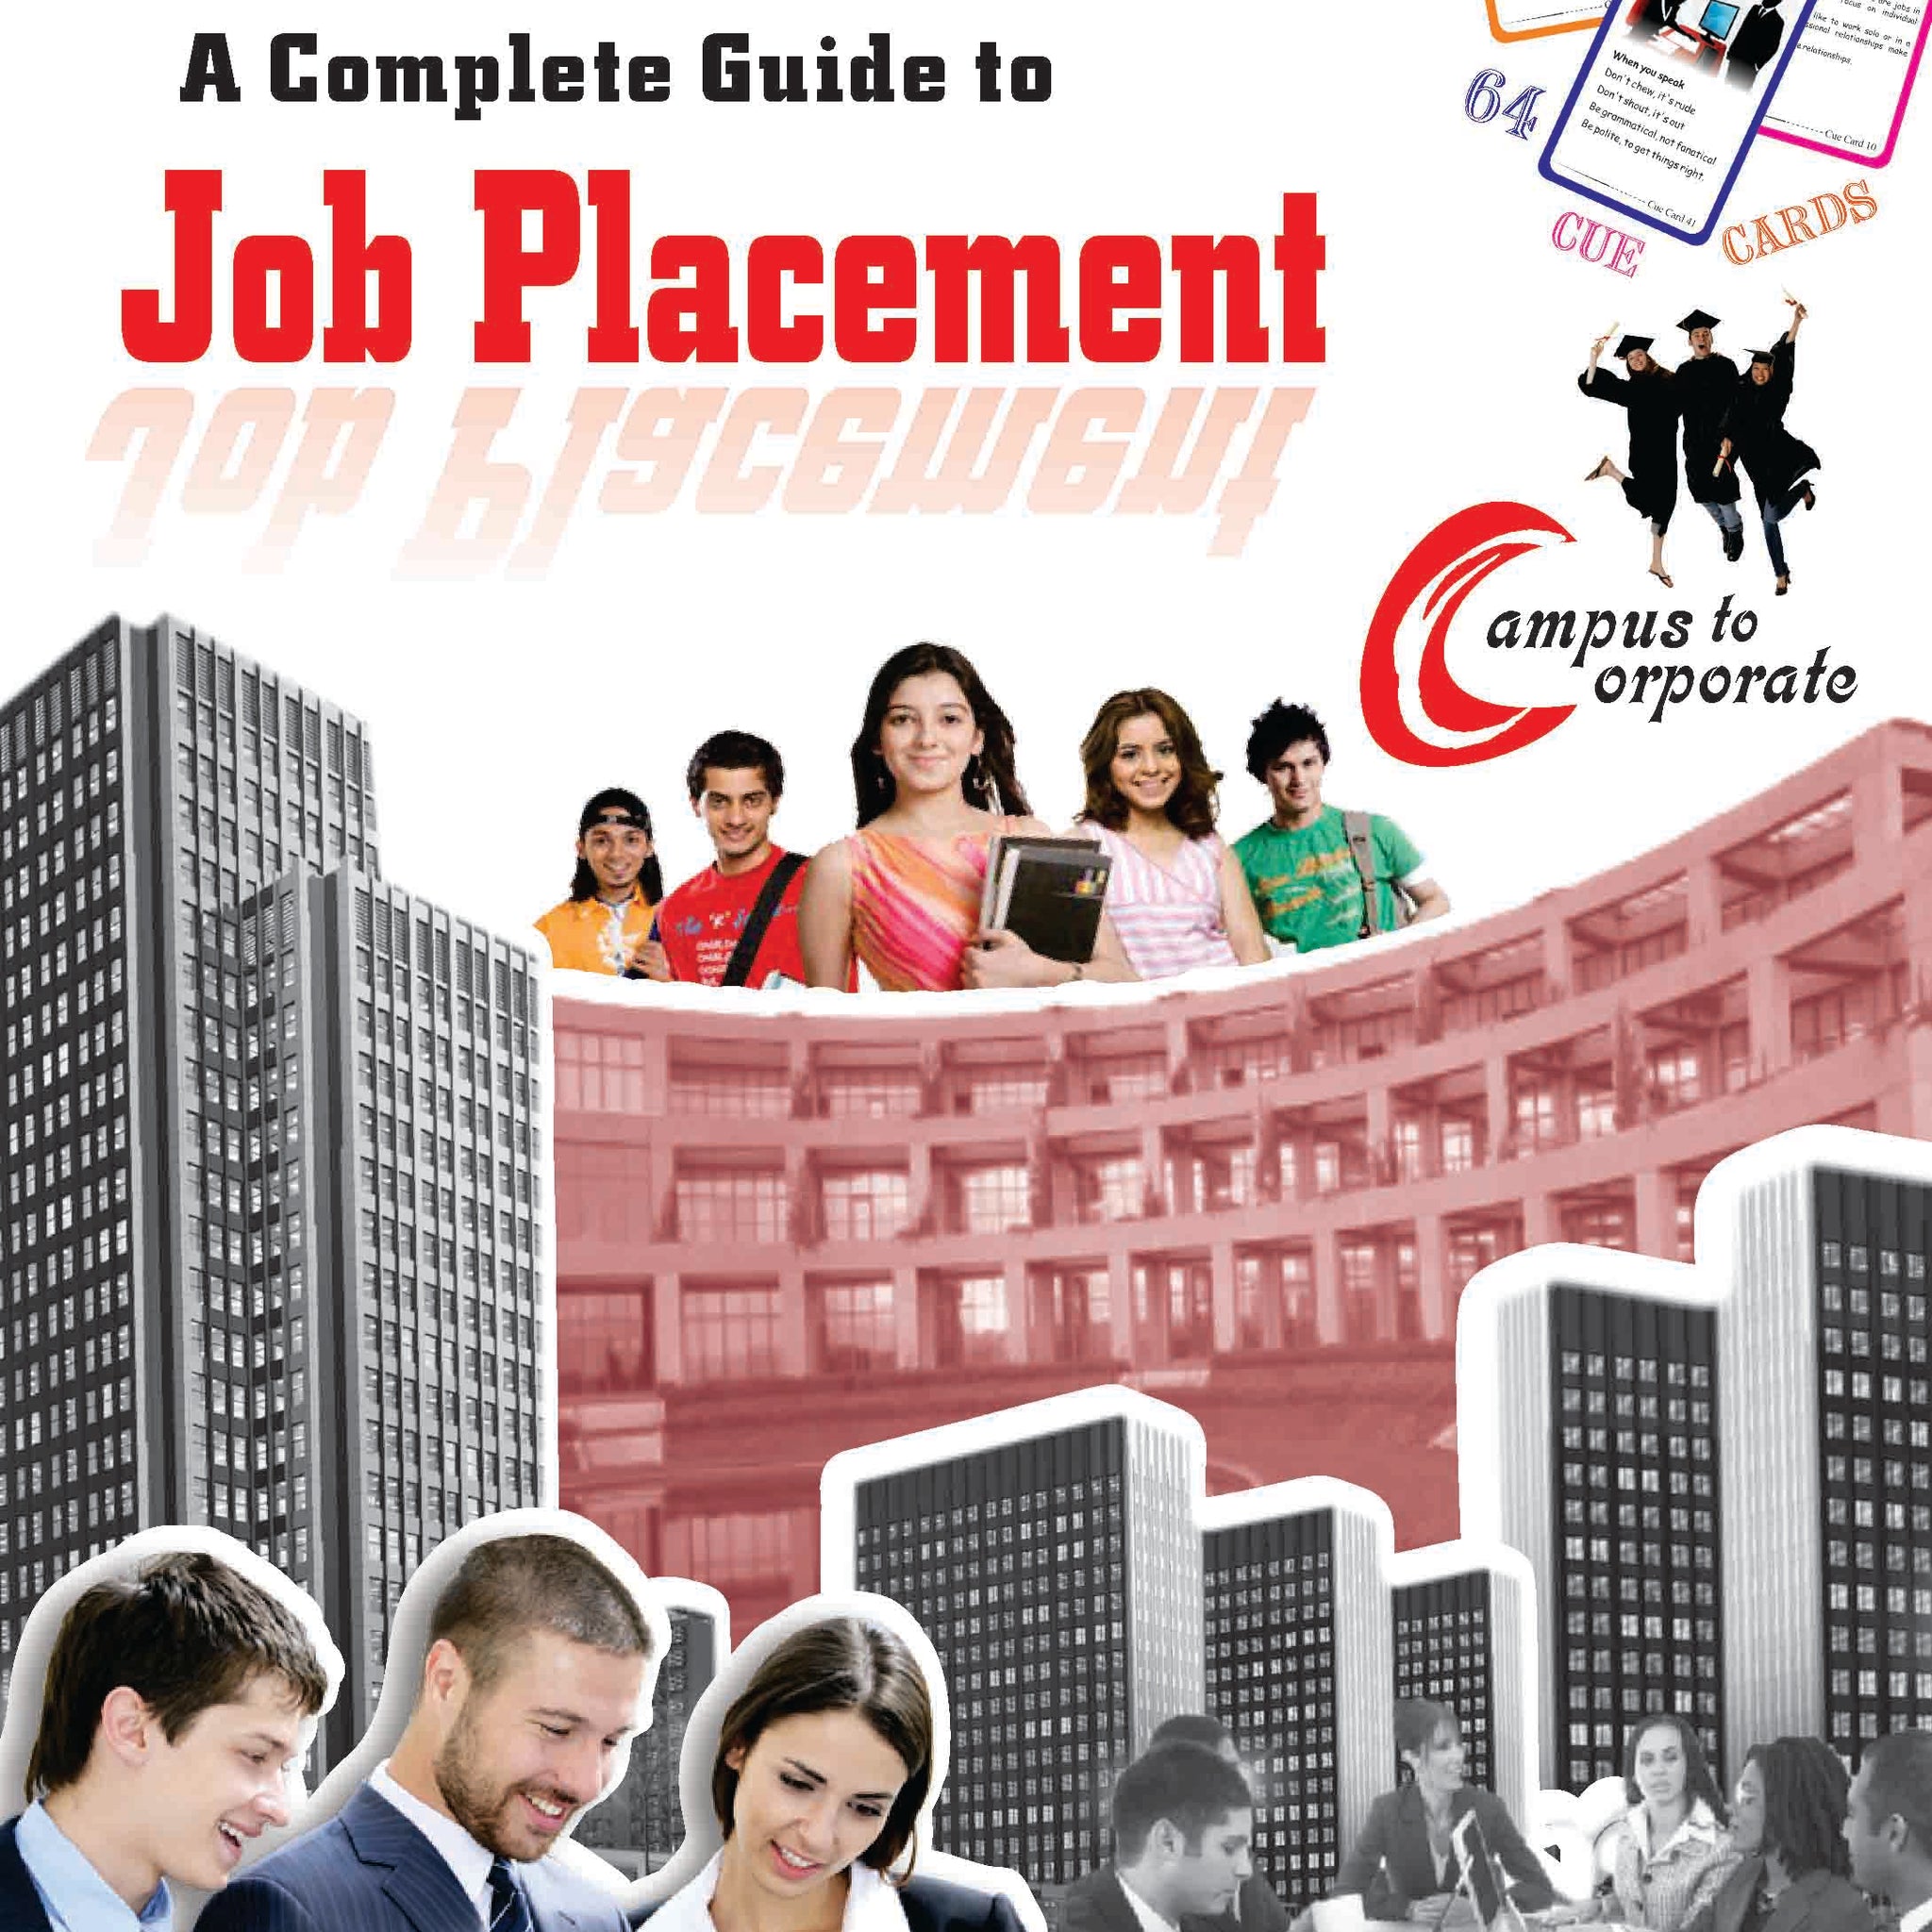 A Complete Guide To Job Placement(Free Cue Cards)